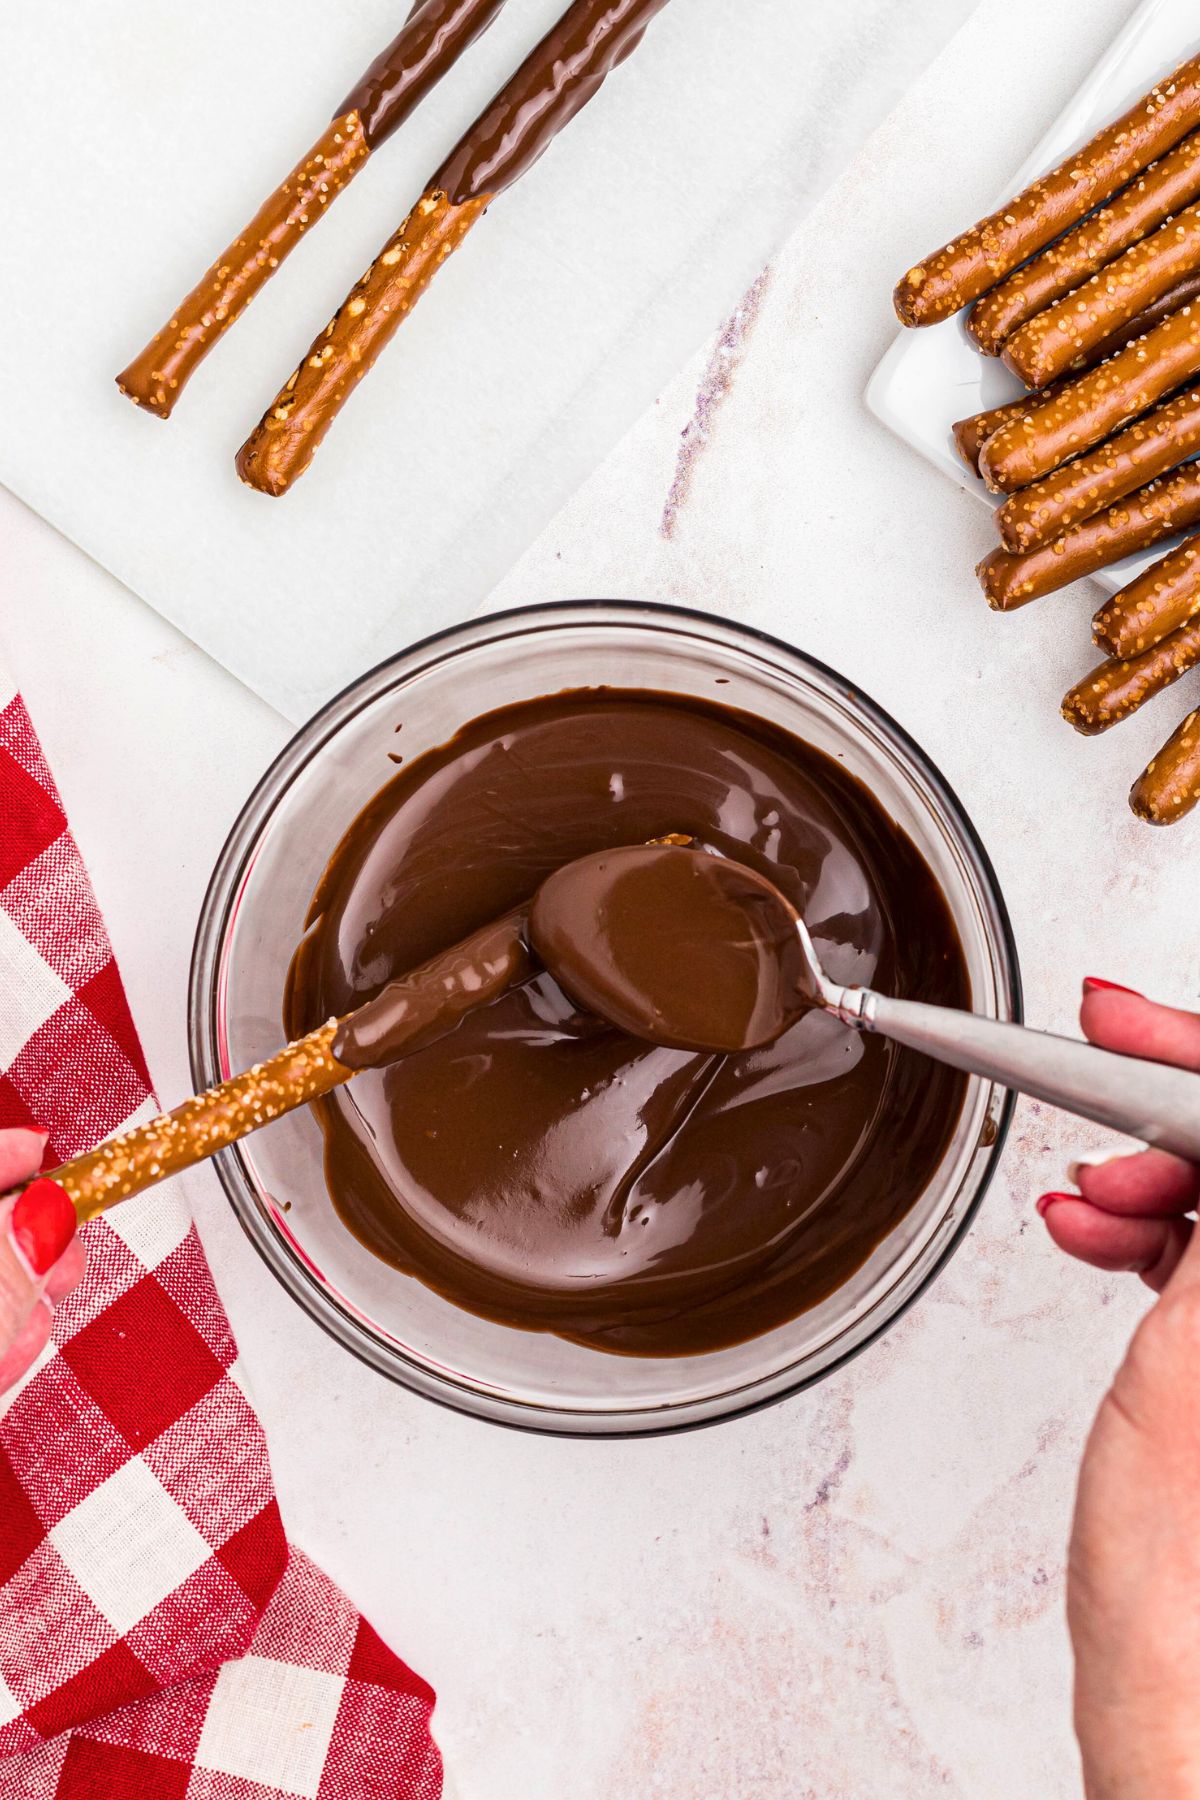 Melted chocolate in a clear glass bowl with a pretzel rod dipped into the bowl.